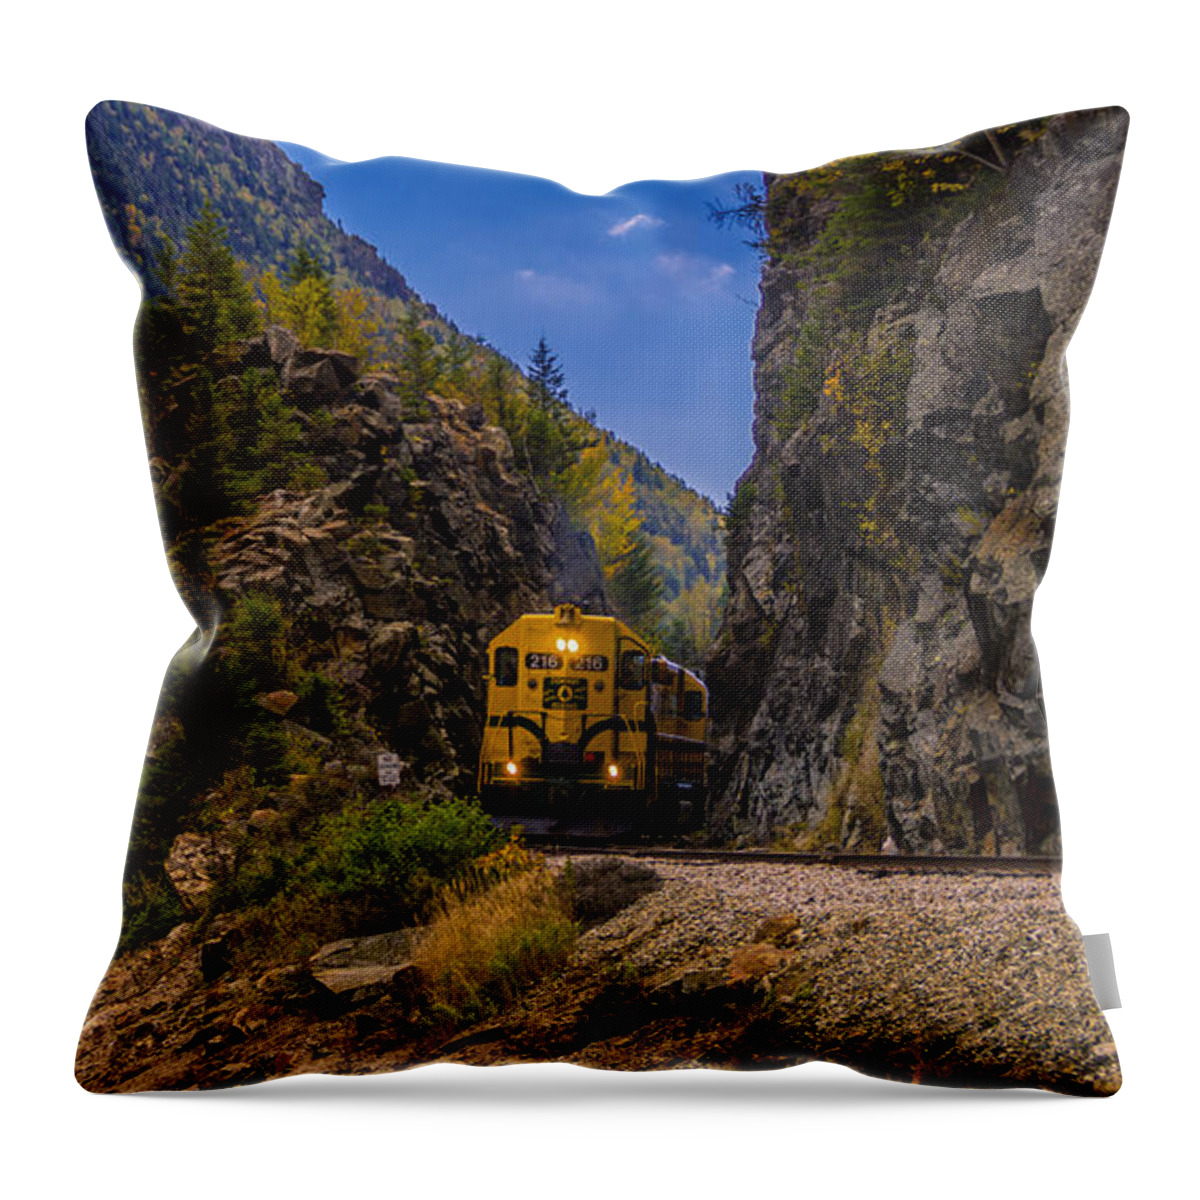 Conway New Hampshire Throw Pillow featuring the photograph Conway Scenic Railroad Notch Train. by New England Photography